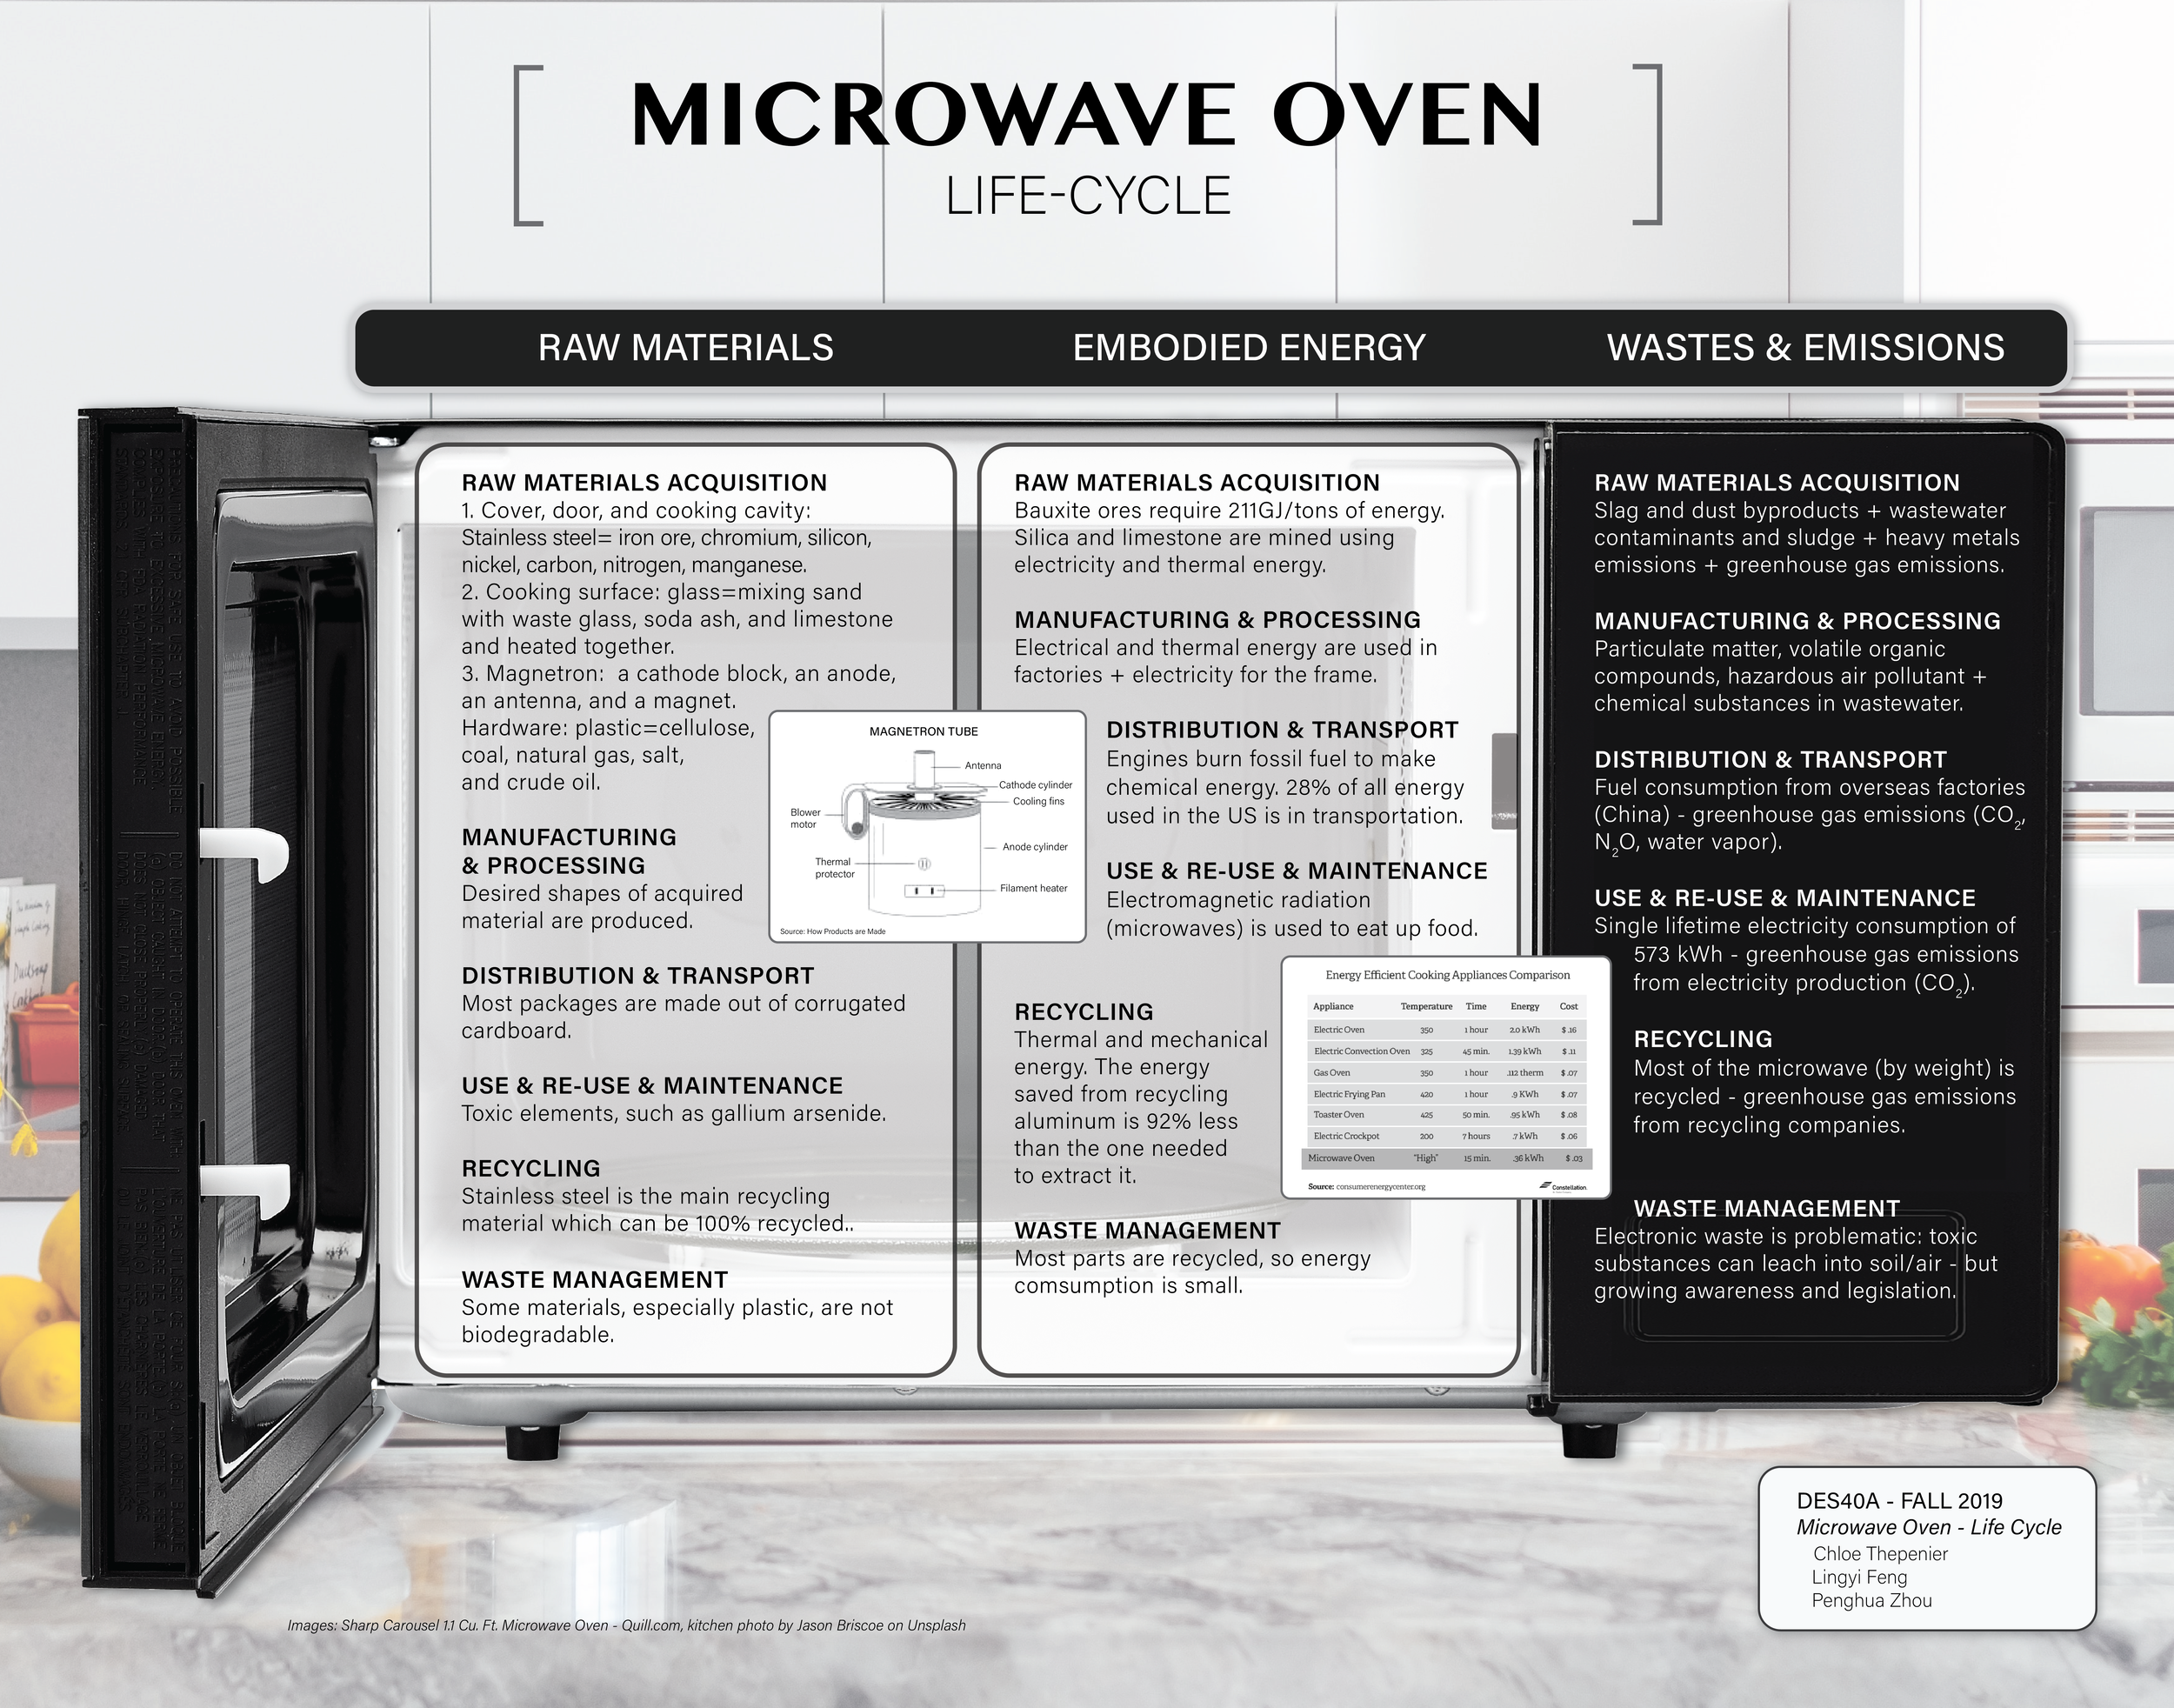 Large Format Microwaves for Materials Research and Industrial Applications.  - Laboratory Microwave Ovens - Microwave Research Applications, laboratory microwave  ovens used for chemical, medical, food and material laboratory applications.